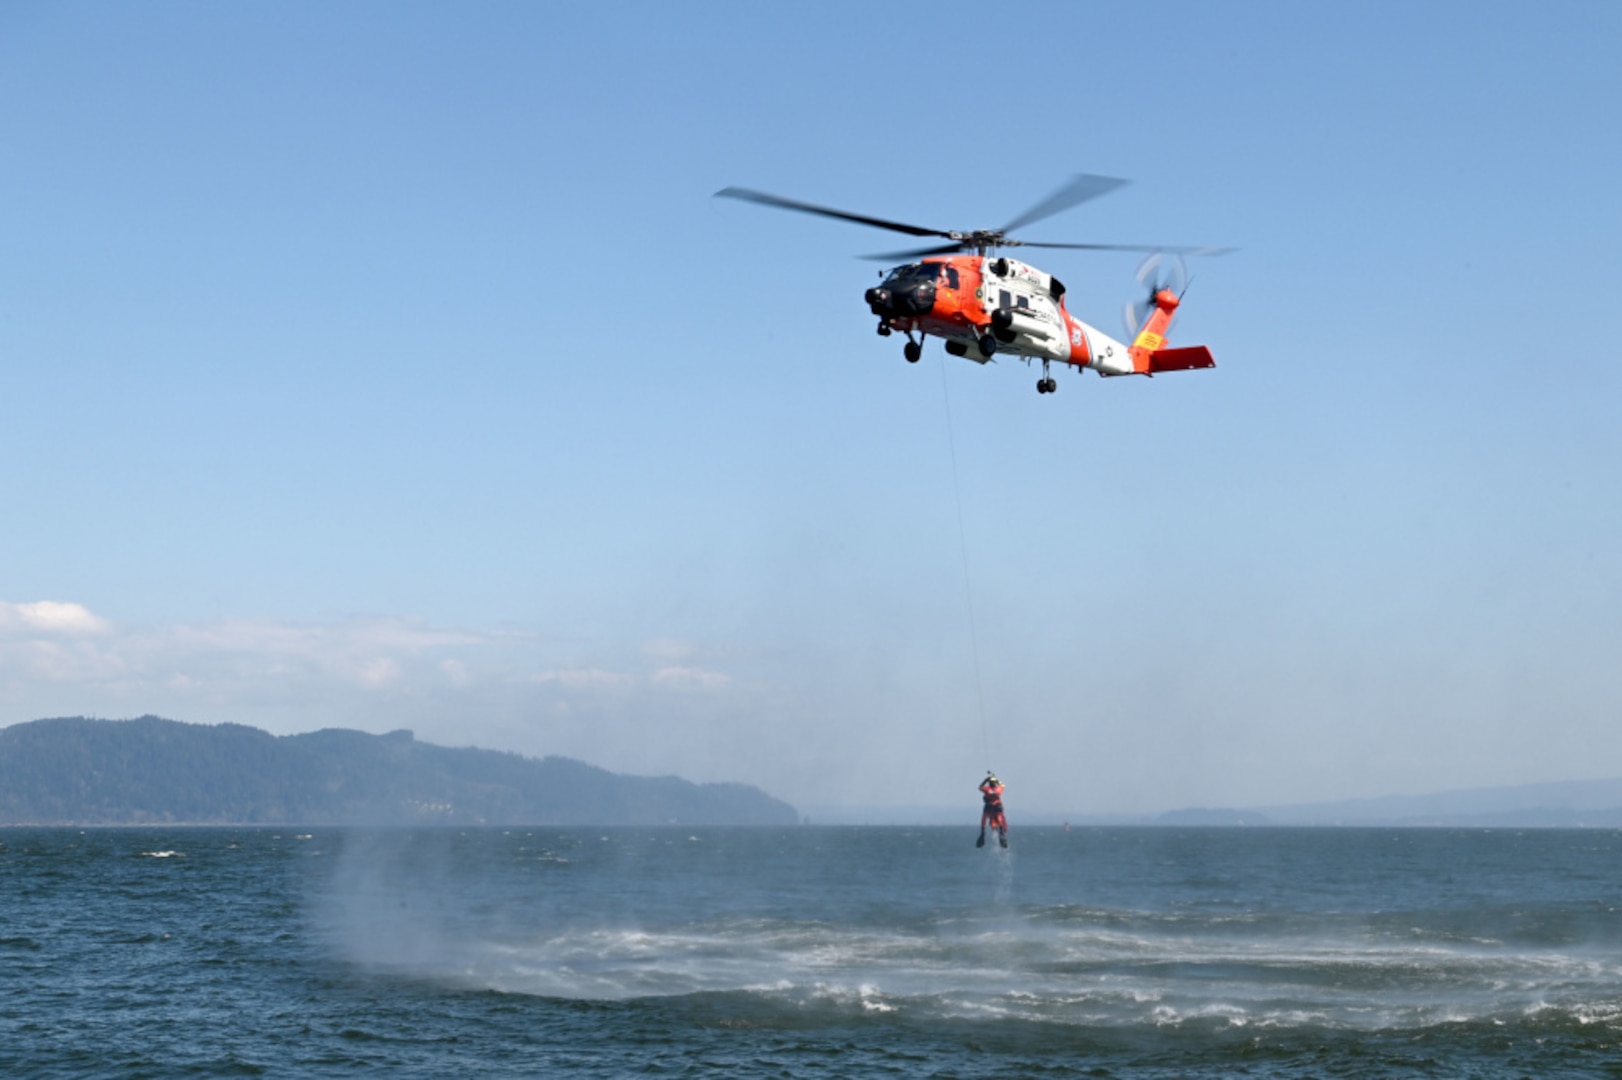 An MH-60 Jayhawk helicopter crew from Coast Guard Sector Columbia River hoists an aviation survival technician from the Columbia River during rescue training in Warrenton, Oregon, Tuesday, Apr.. 20, 2021. Coast Guard responders train to keep proficient and ready to respond at a moments notice to a call for help. U.S. Coast Guard photo by Petty Officer 1st Class Cynthia Oldham.